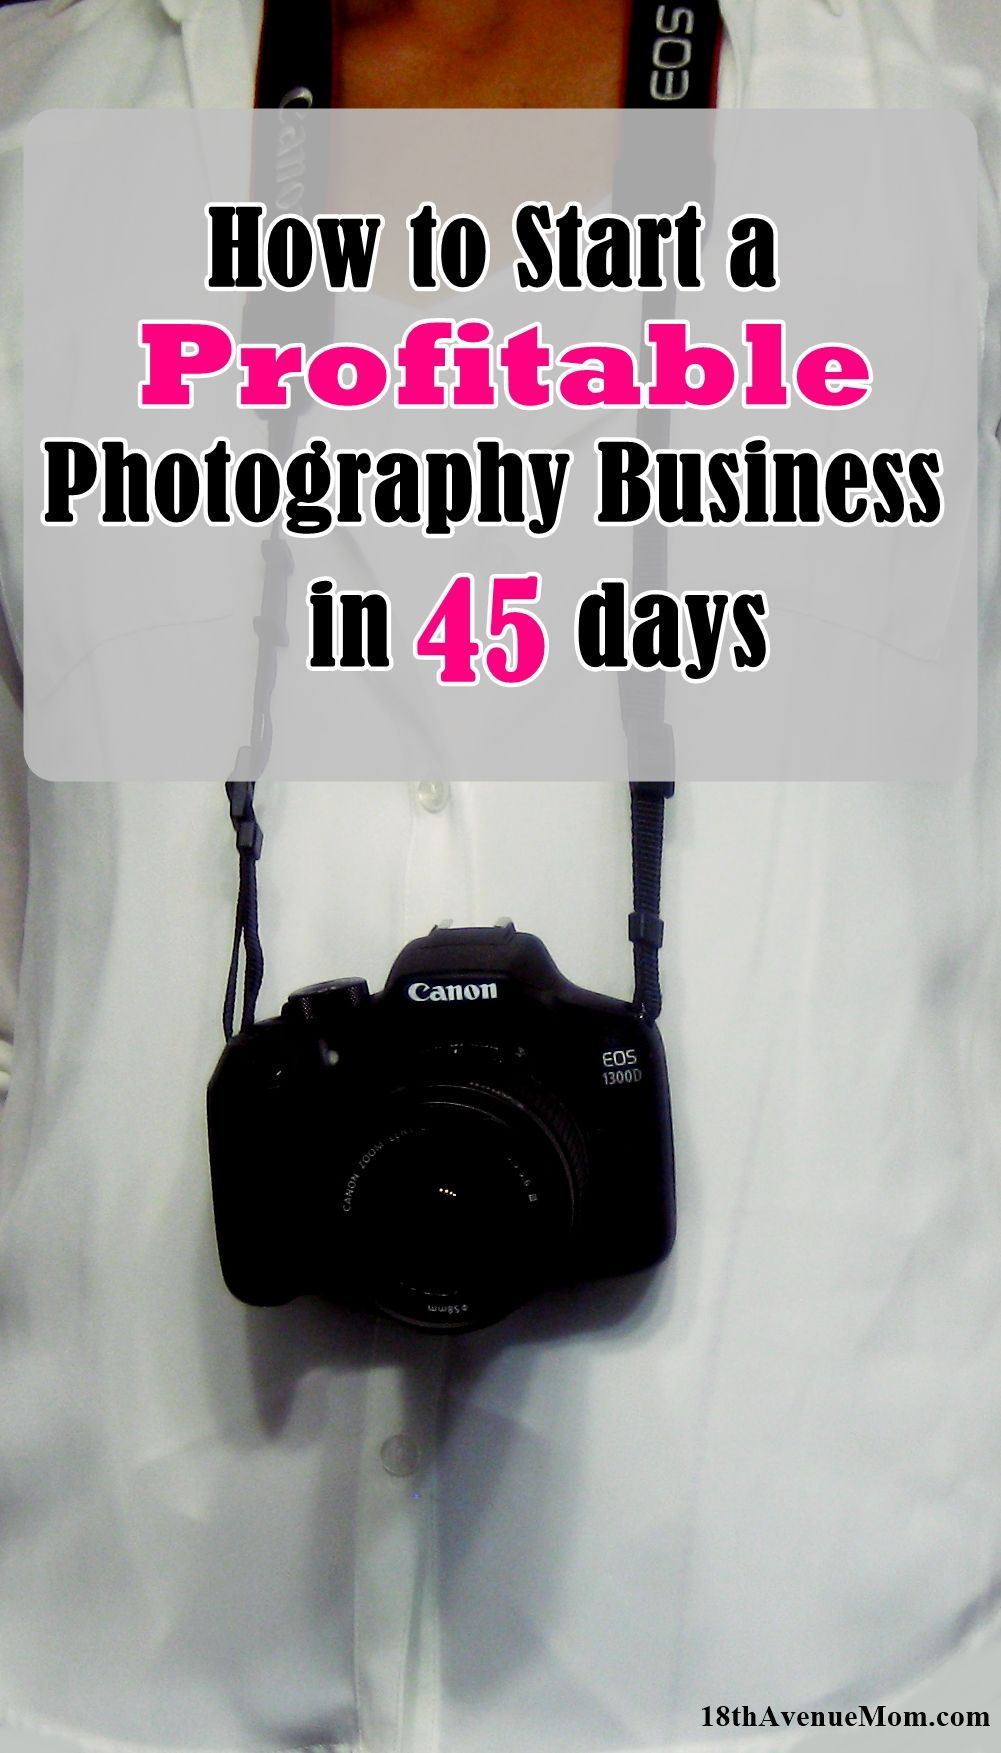 Starting a photography business is a great way to work from home. Startup costs are fairly low, and you can become a professional